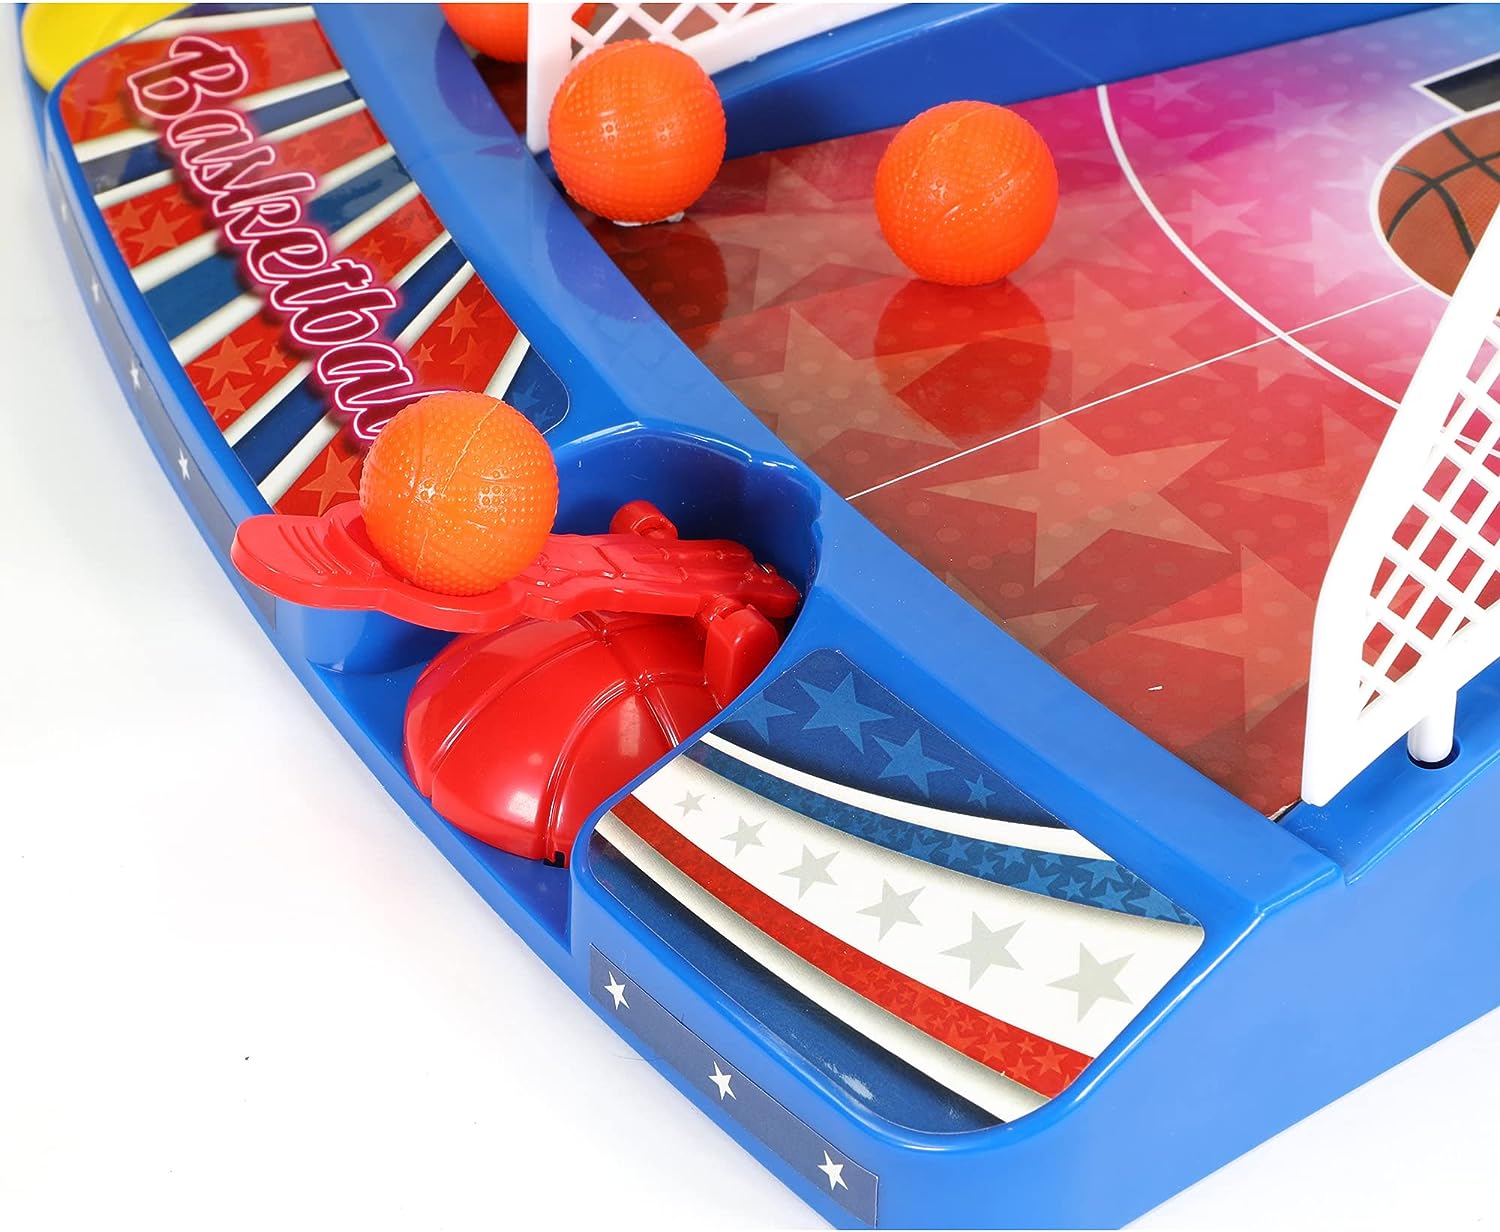 Retro Arcade Electronic: Basketball -Tabletop Game, Electric Scoreboard, Sound Effects, 2 Players, Ages 6+